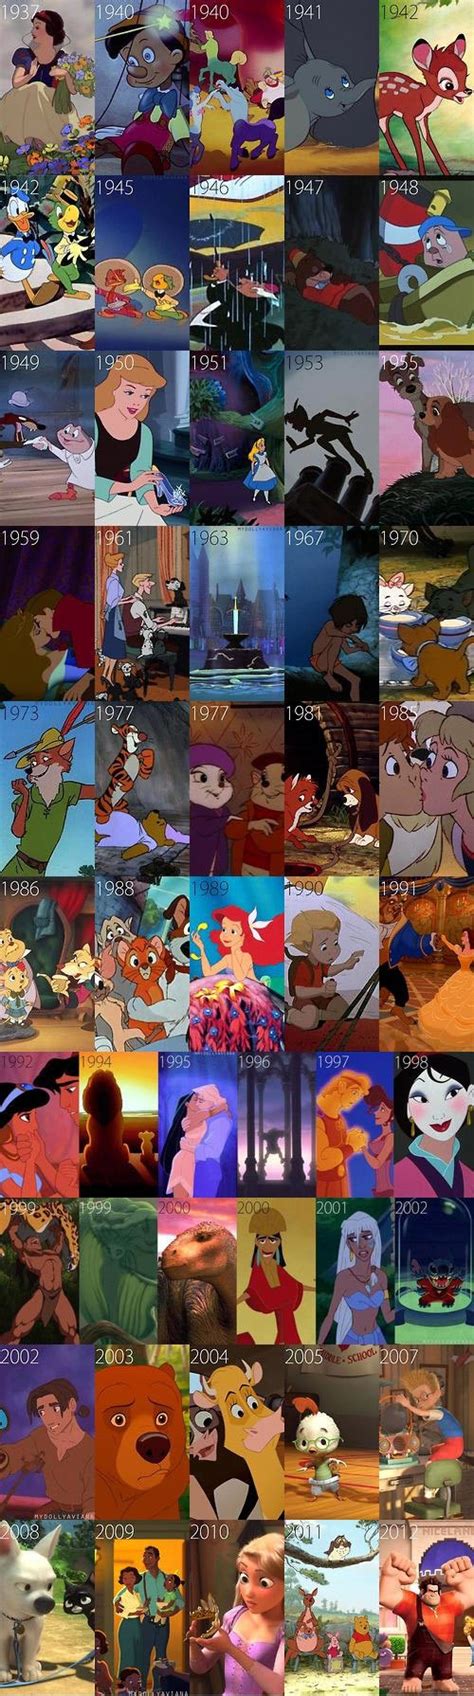 A Summary of All Disney Animated Films  Infographic